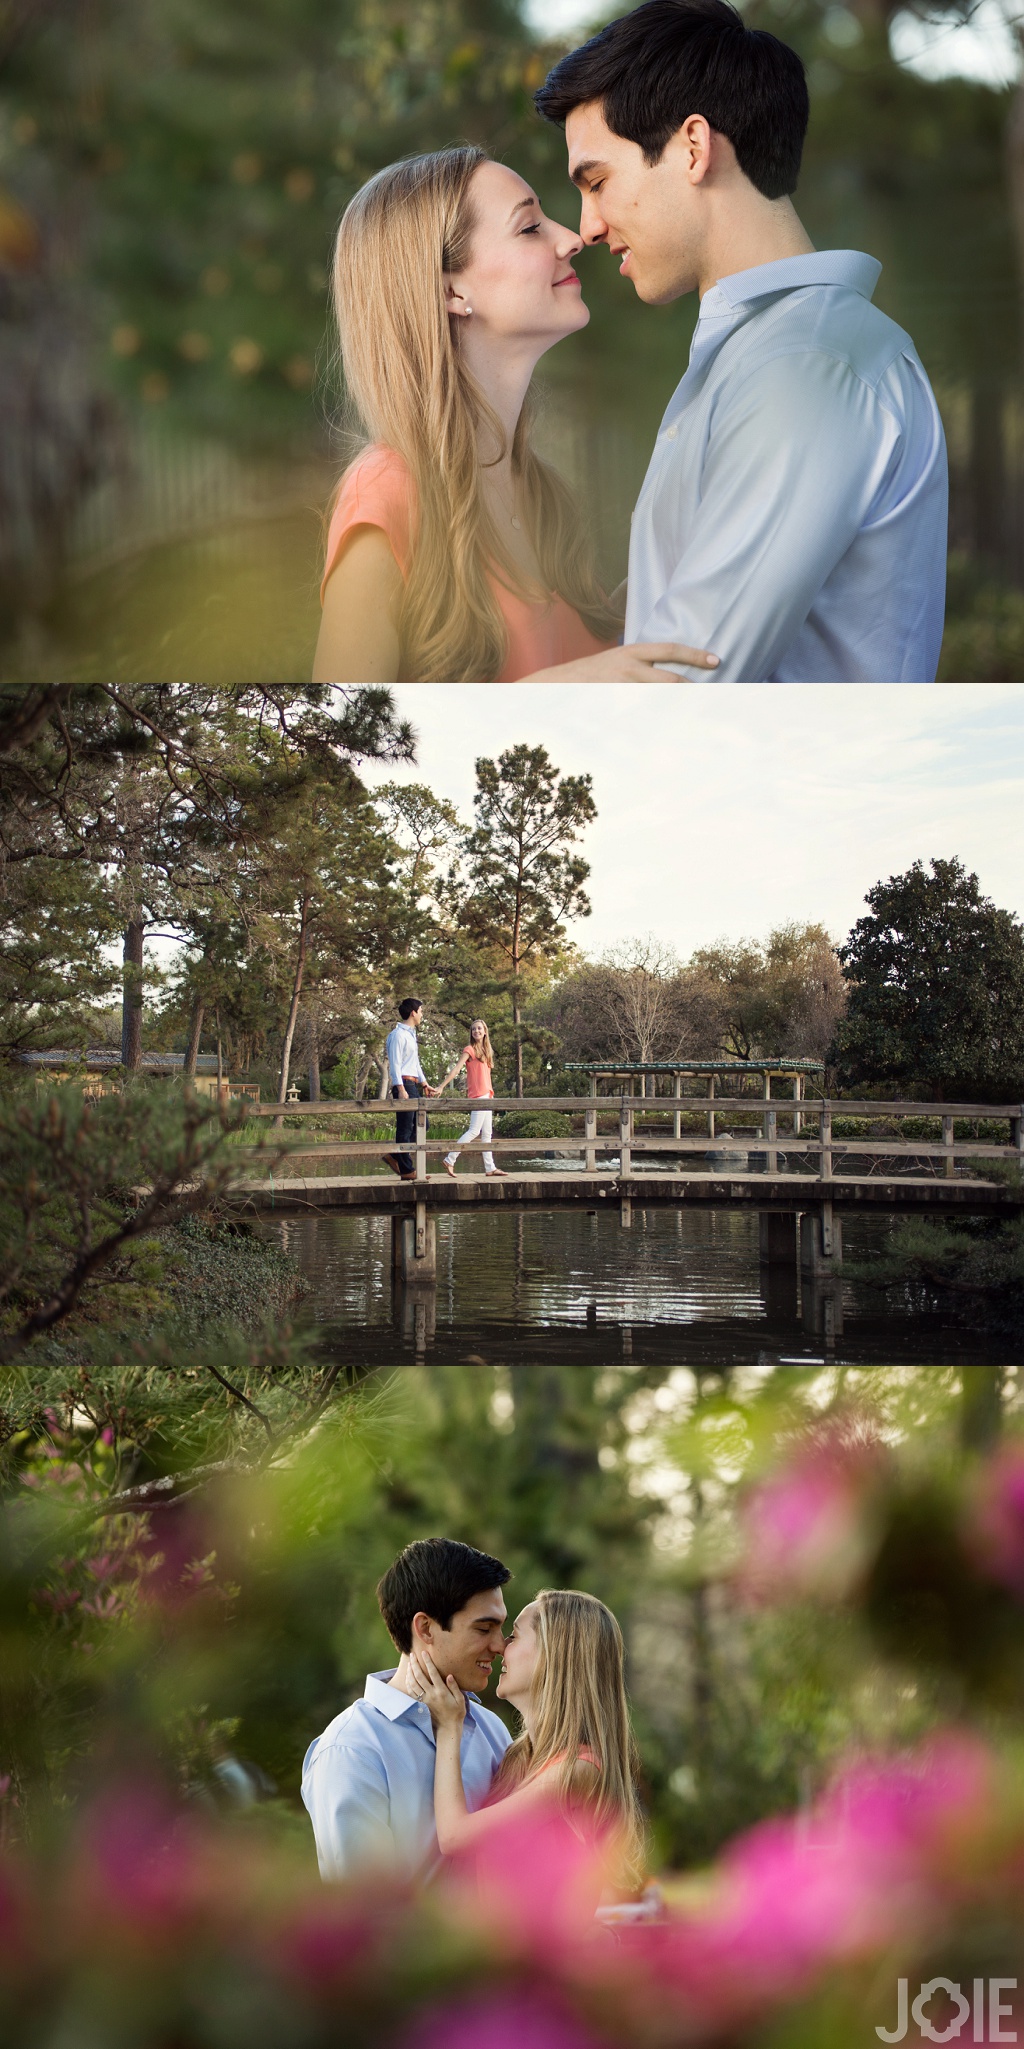 Laura and Phillip's engagement session at the Japanese Gardens in Hermann Park by Joie Photographie